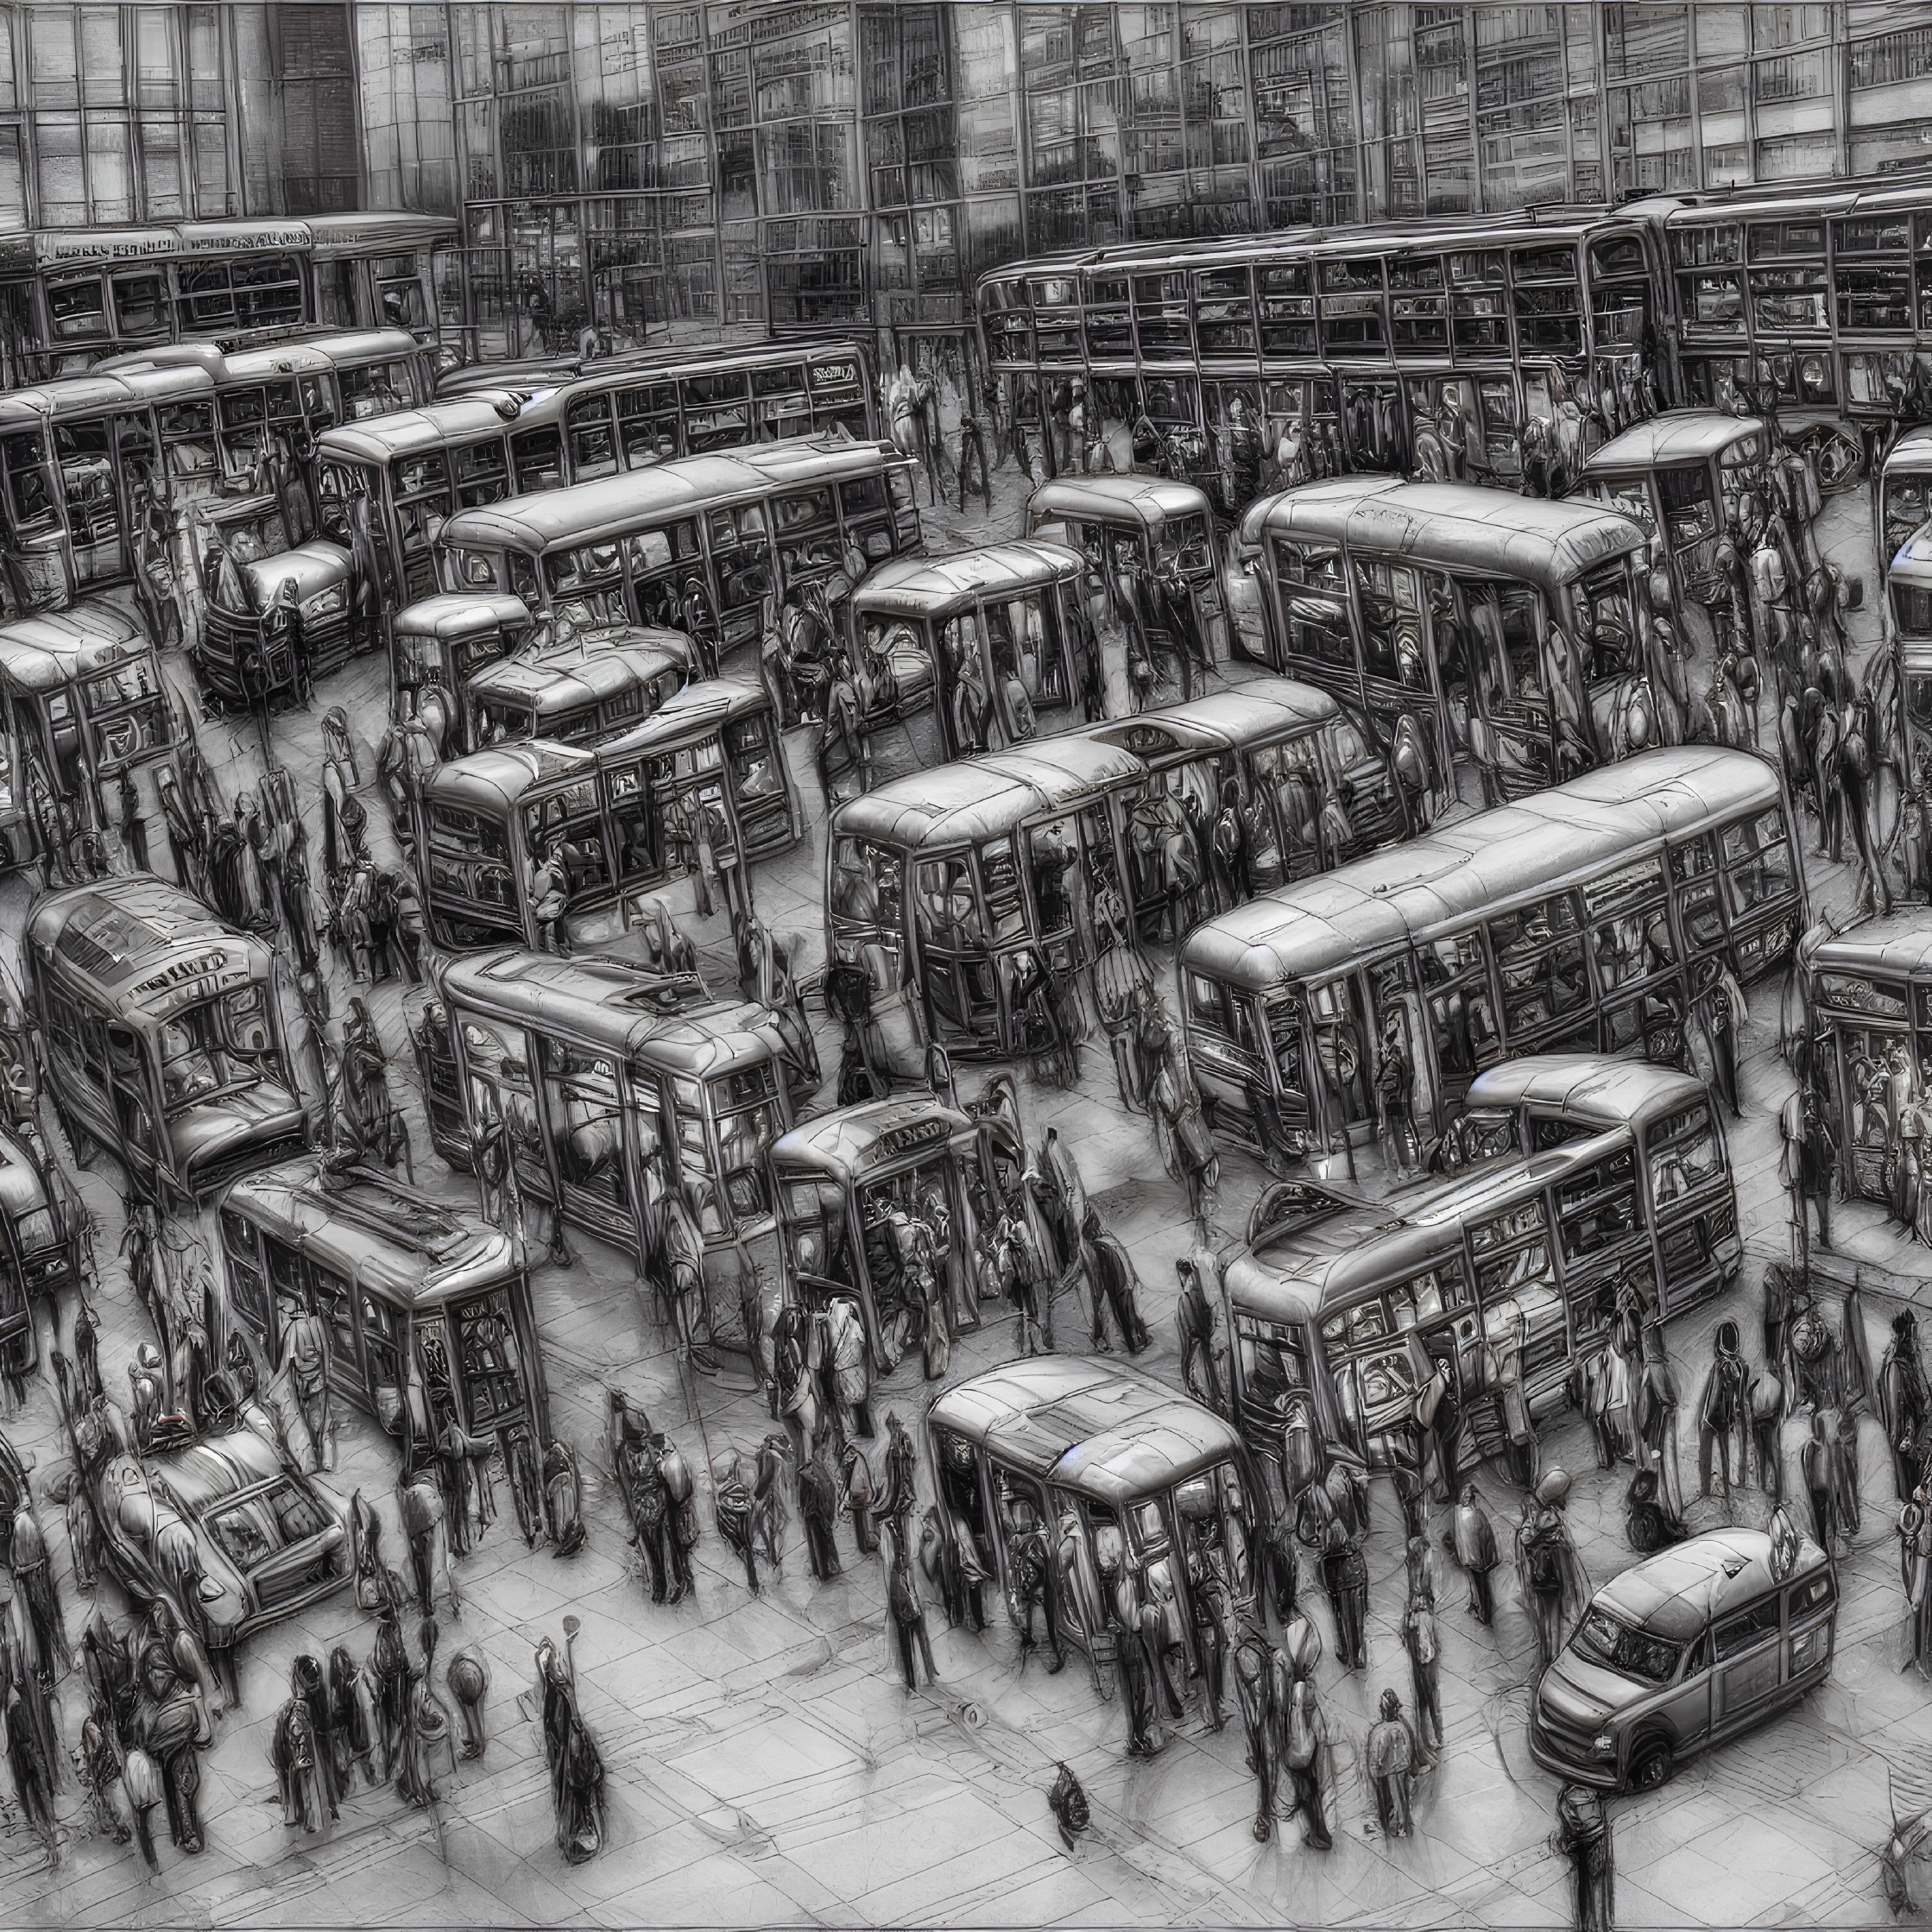 Urban grayscale bus station with multiple buses and crowds